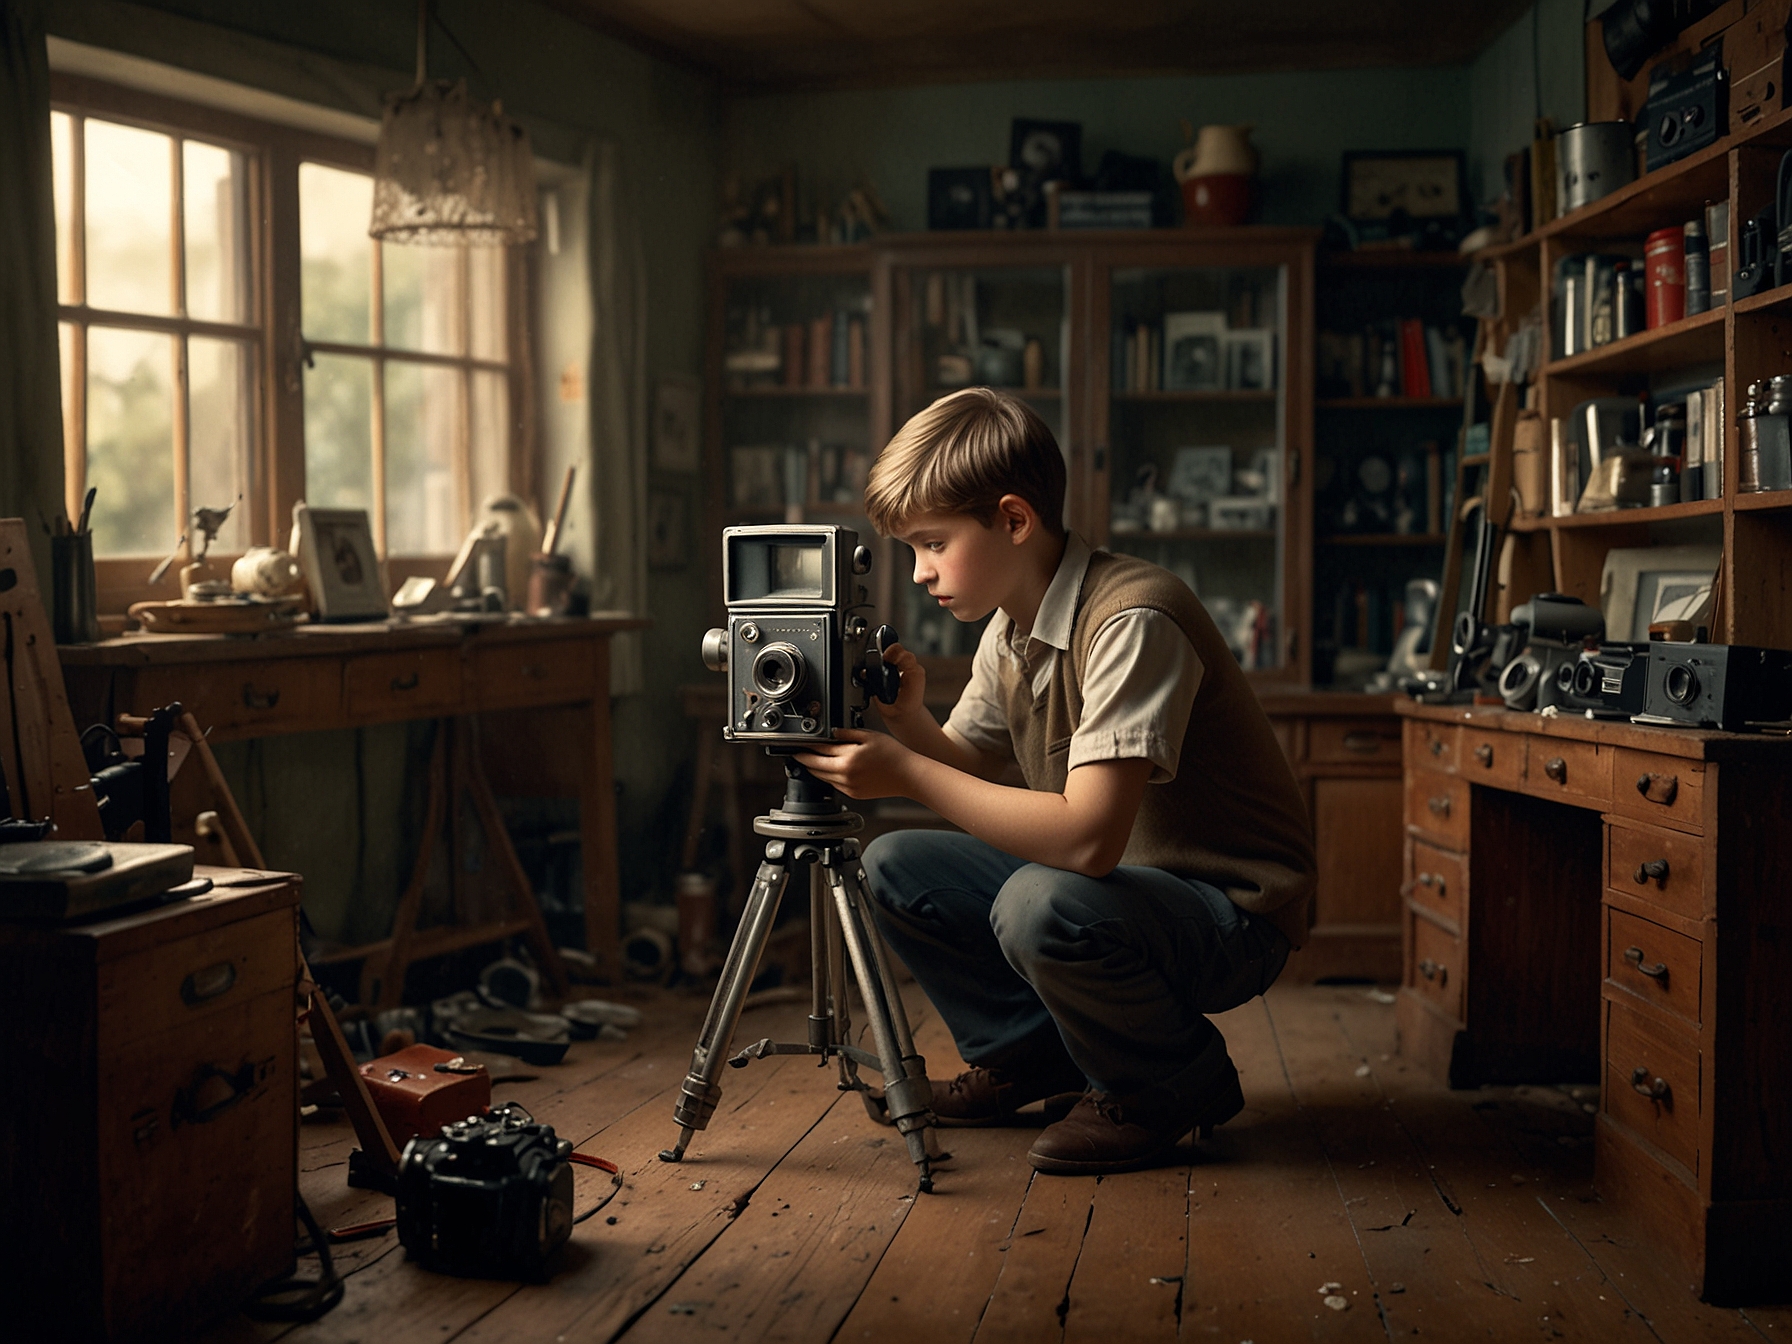 A promotional image for 'Camera' showing the mute boy and the camera repairman in the shop, surrounded by vintage camera equipment. Capturing the essence of the film's analog, reflective theme.